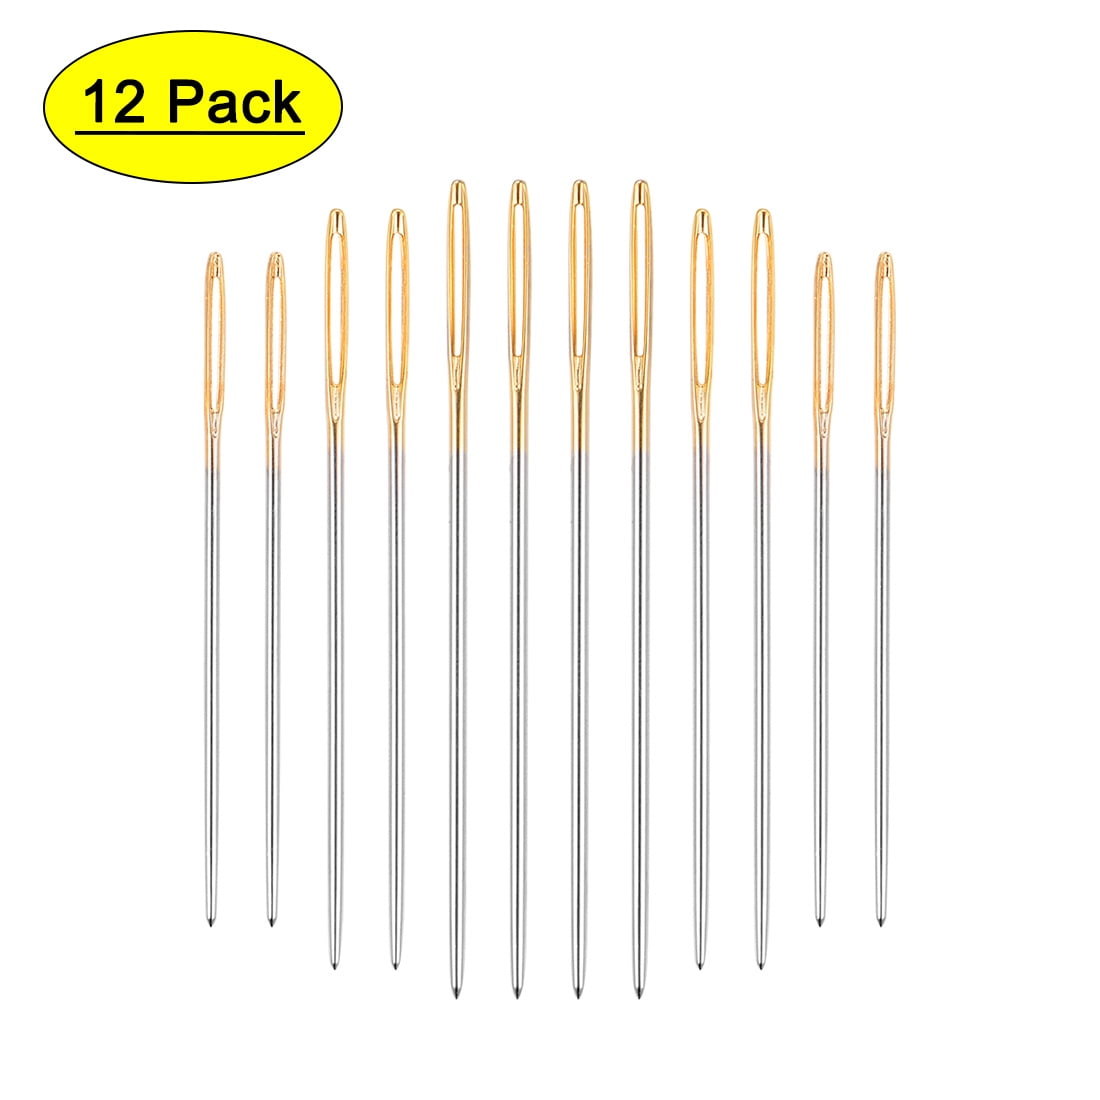 Medsuo 9pcs 4.9/5.9/6.9 Extra Long Darning Needles Sewing Needles Big  Eye Hand Quilting Needles for Doll Making Webbing Carpet Leather Canvas